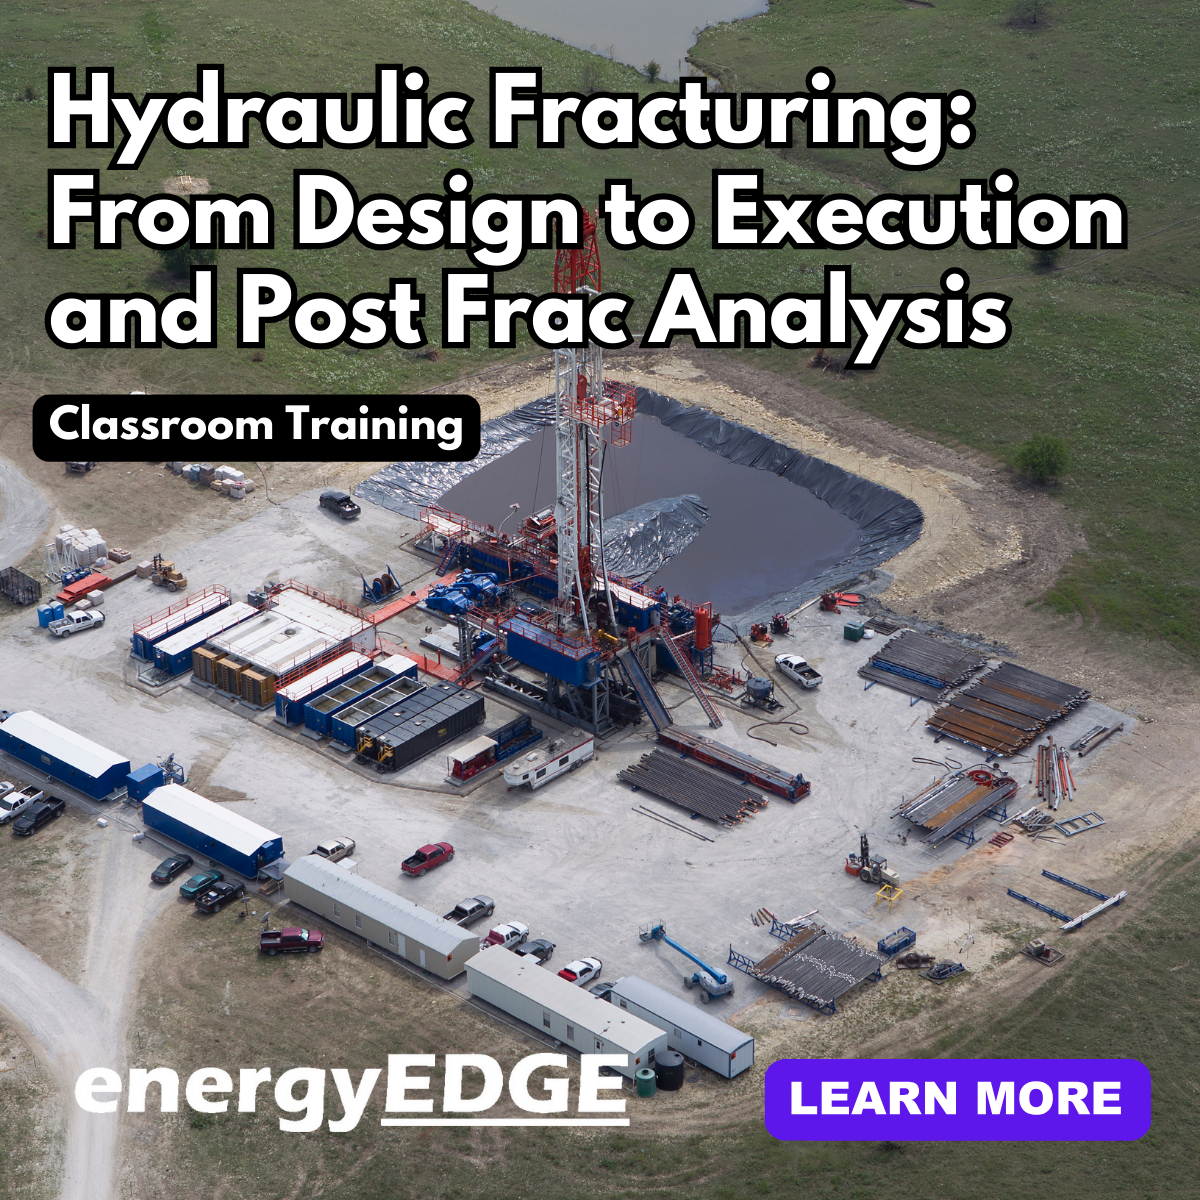 Hydraulic Fracturing: From Design to Execution and Post Frac Analysis